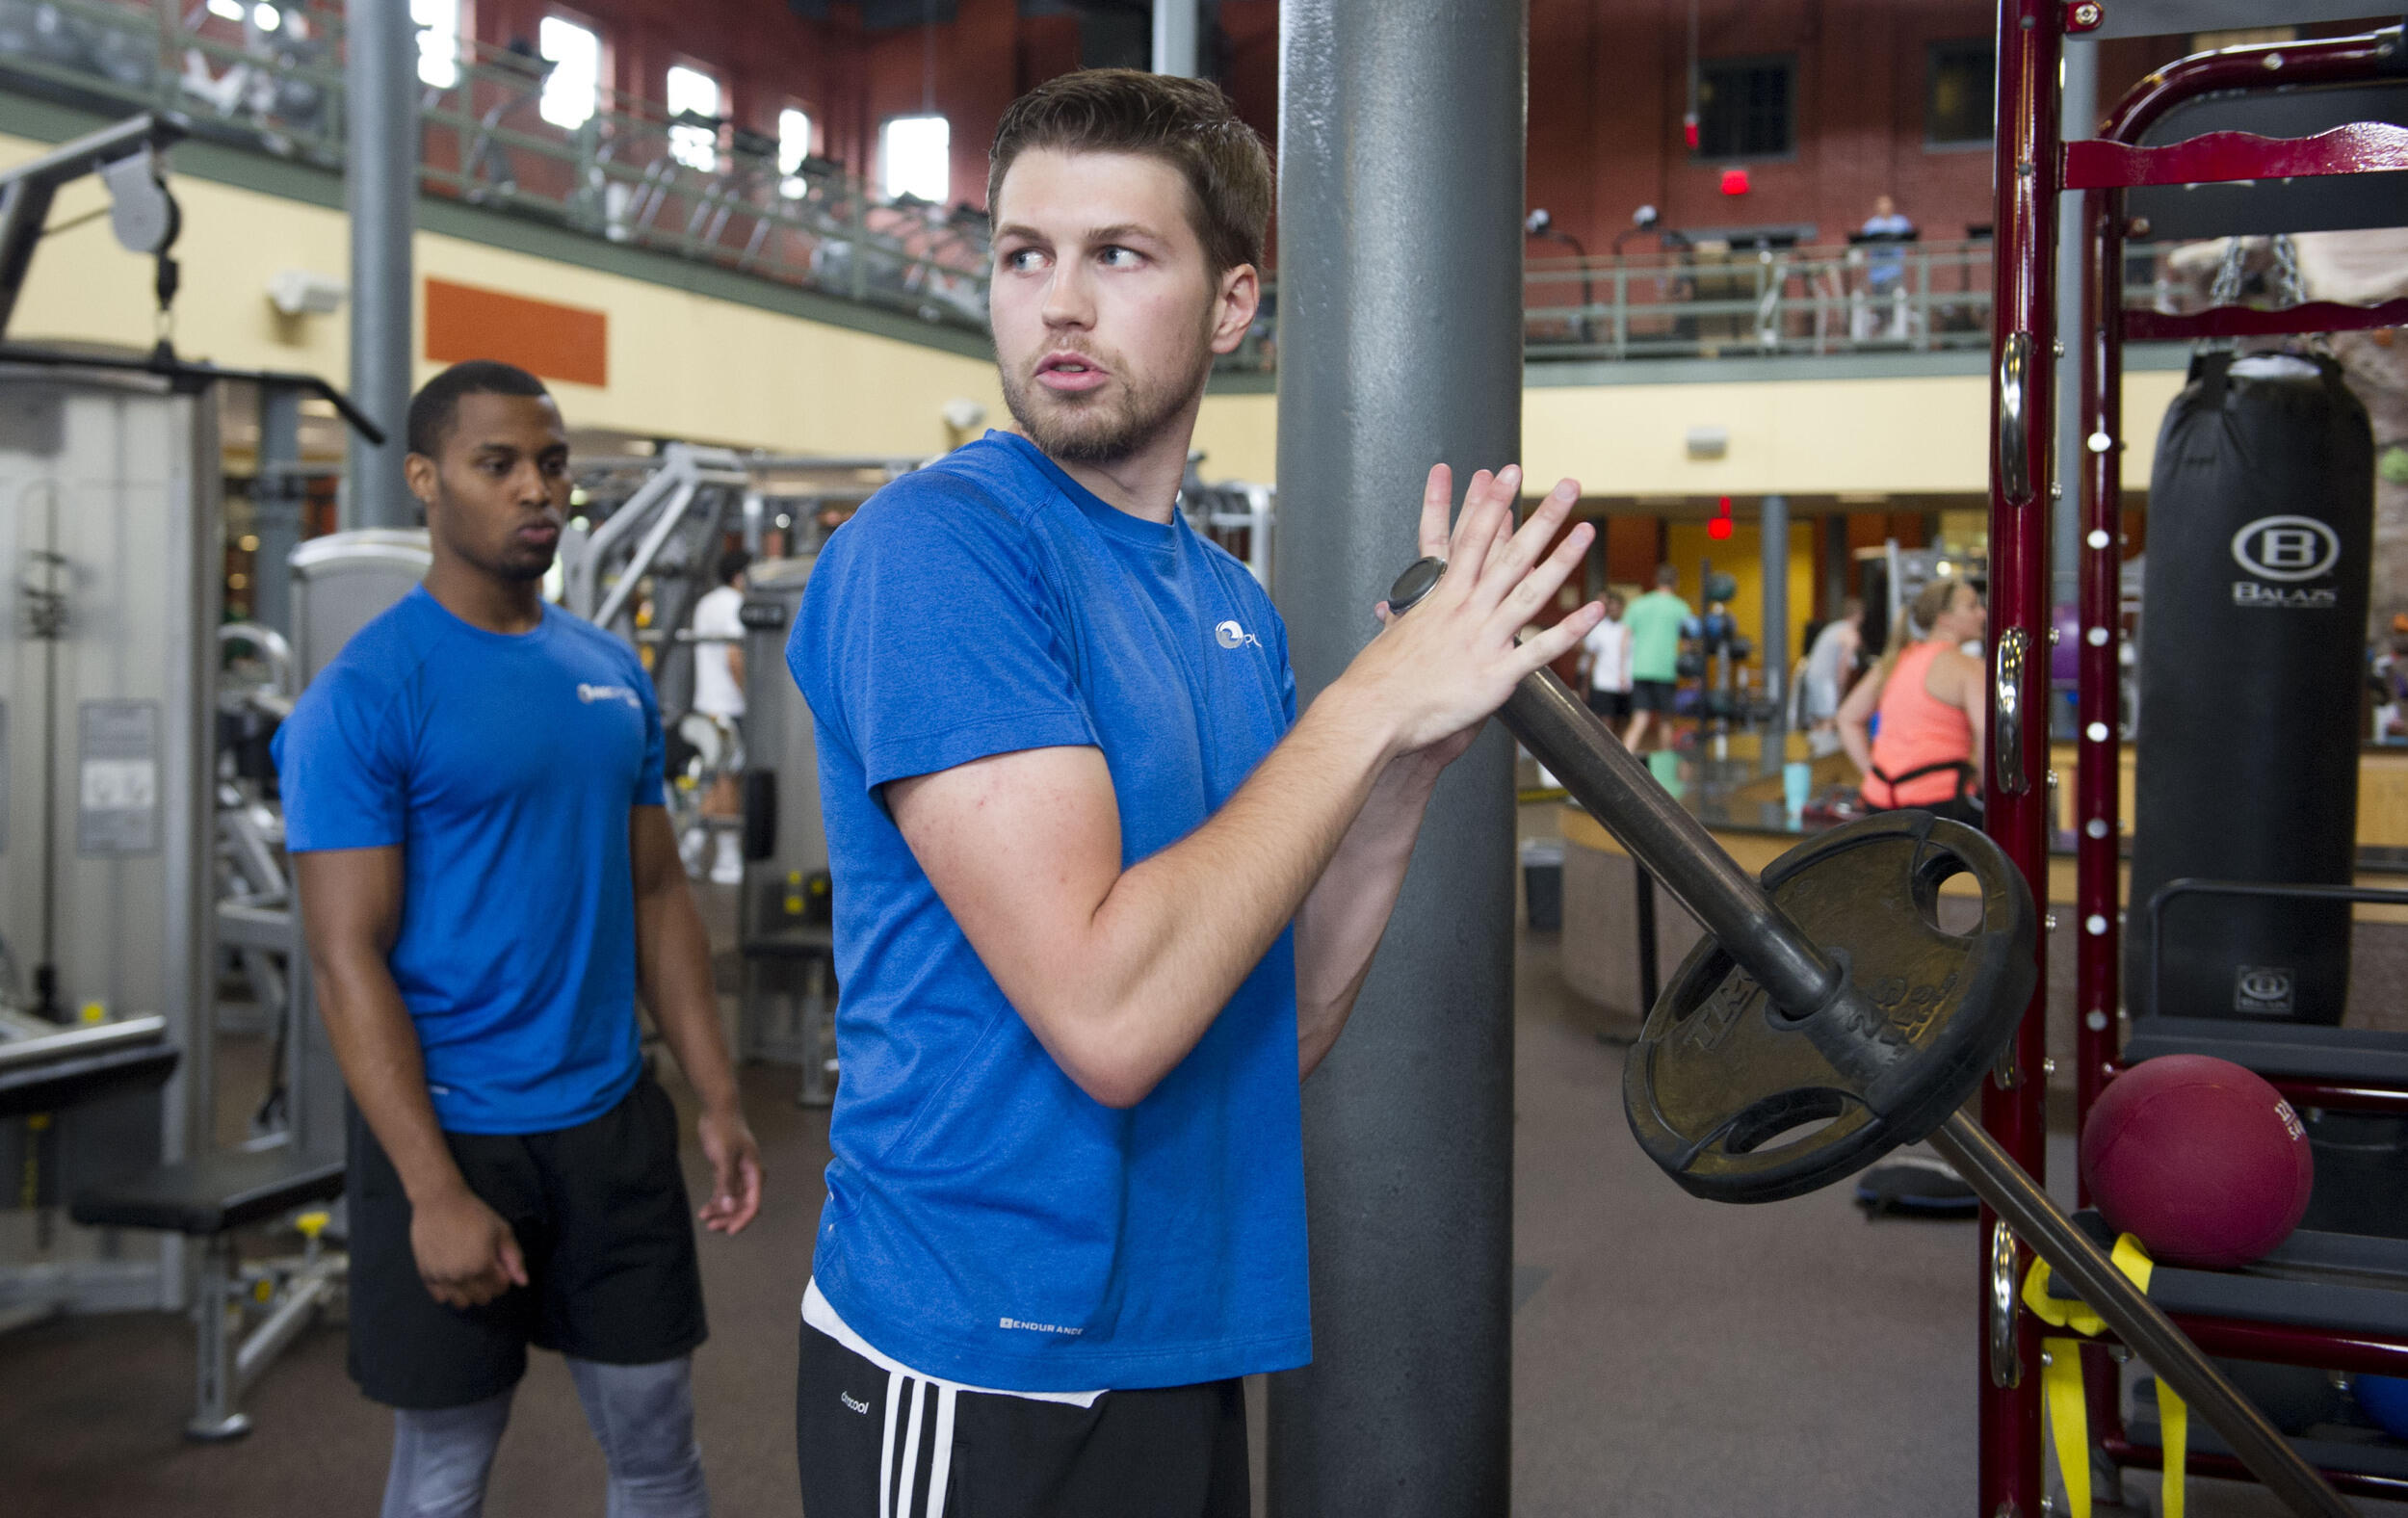 For Imthurn, the gym is a second home, a place where people come to improve and grow. “Exercise is such a beneficial thing," he said. "I have a purpose here, and that is to help somebody be better.” (Julia Rendleman, University Marketing)